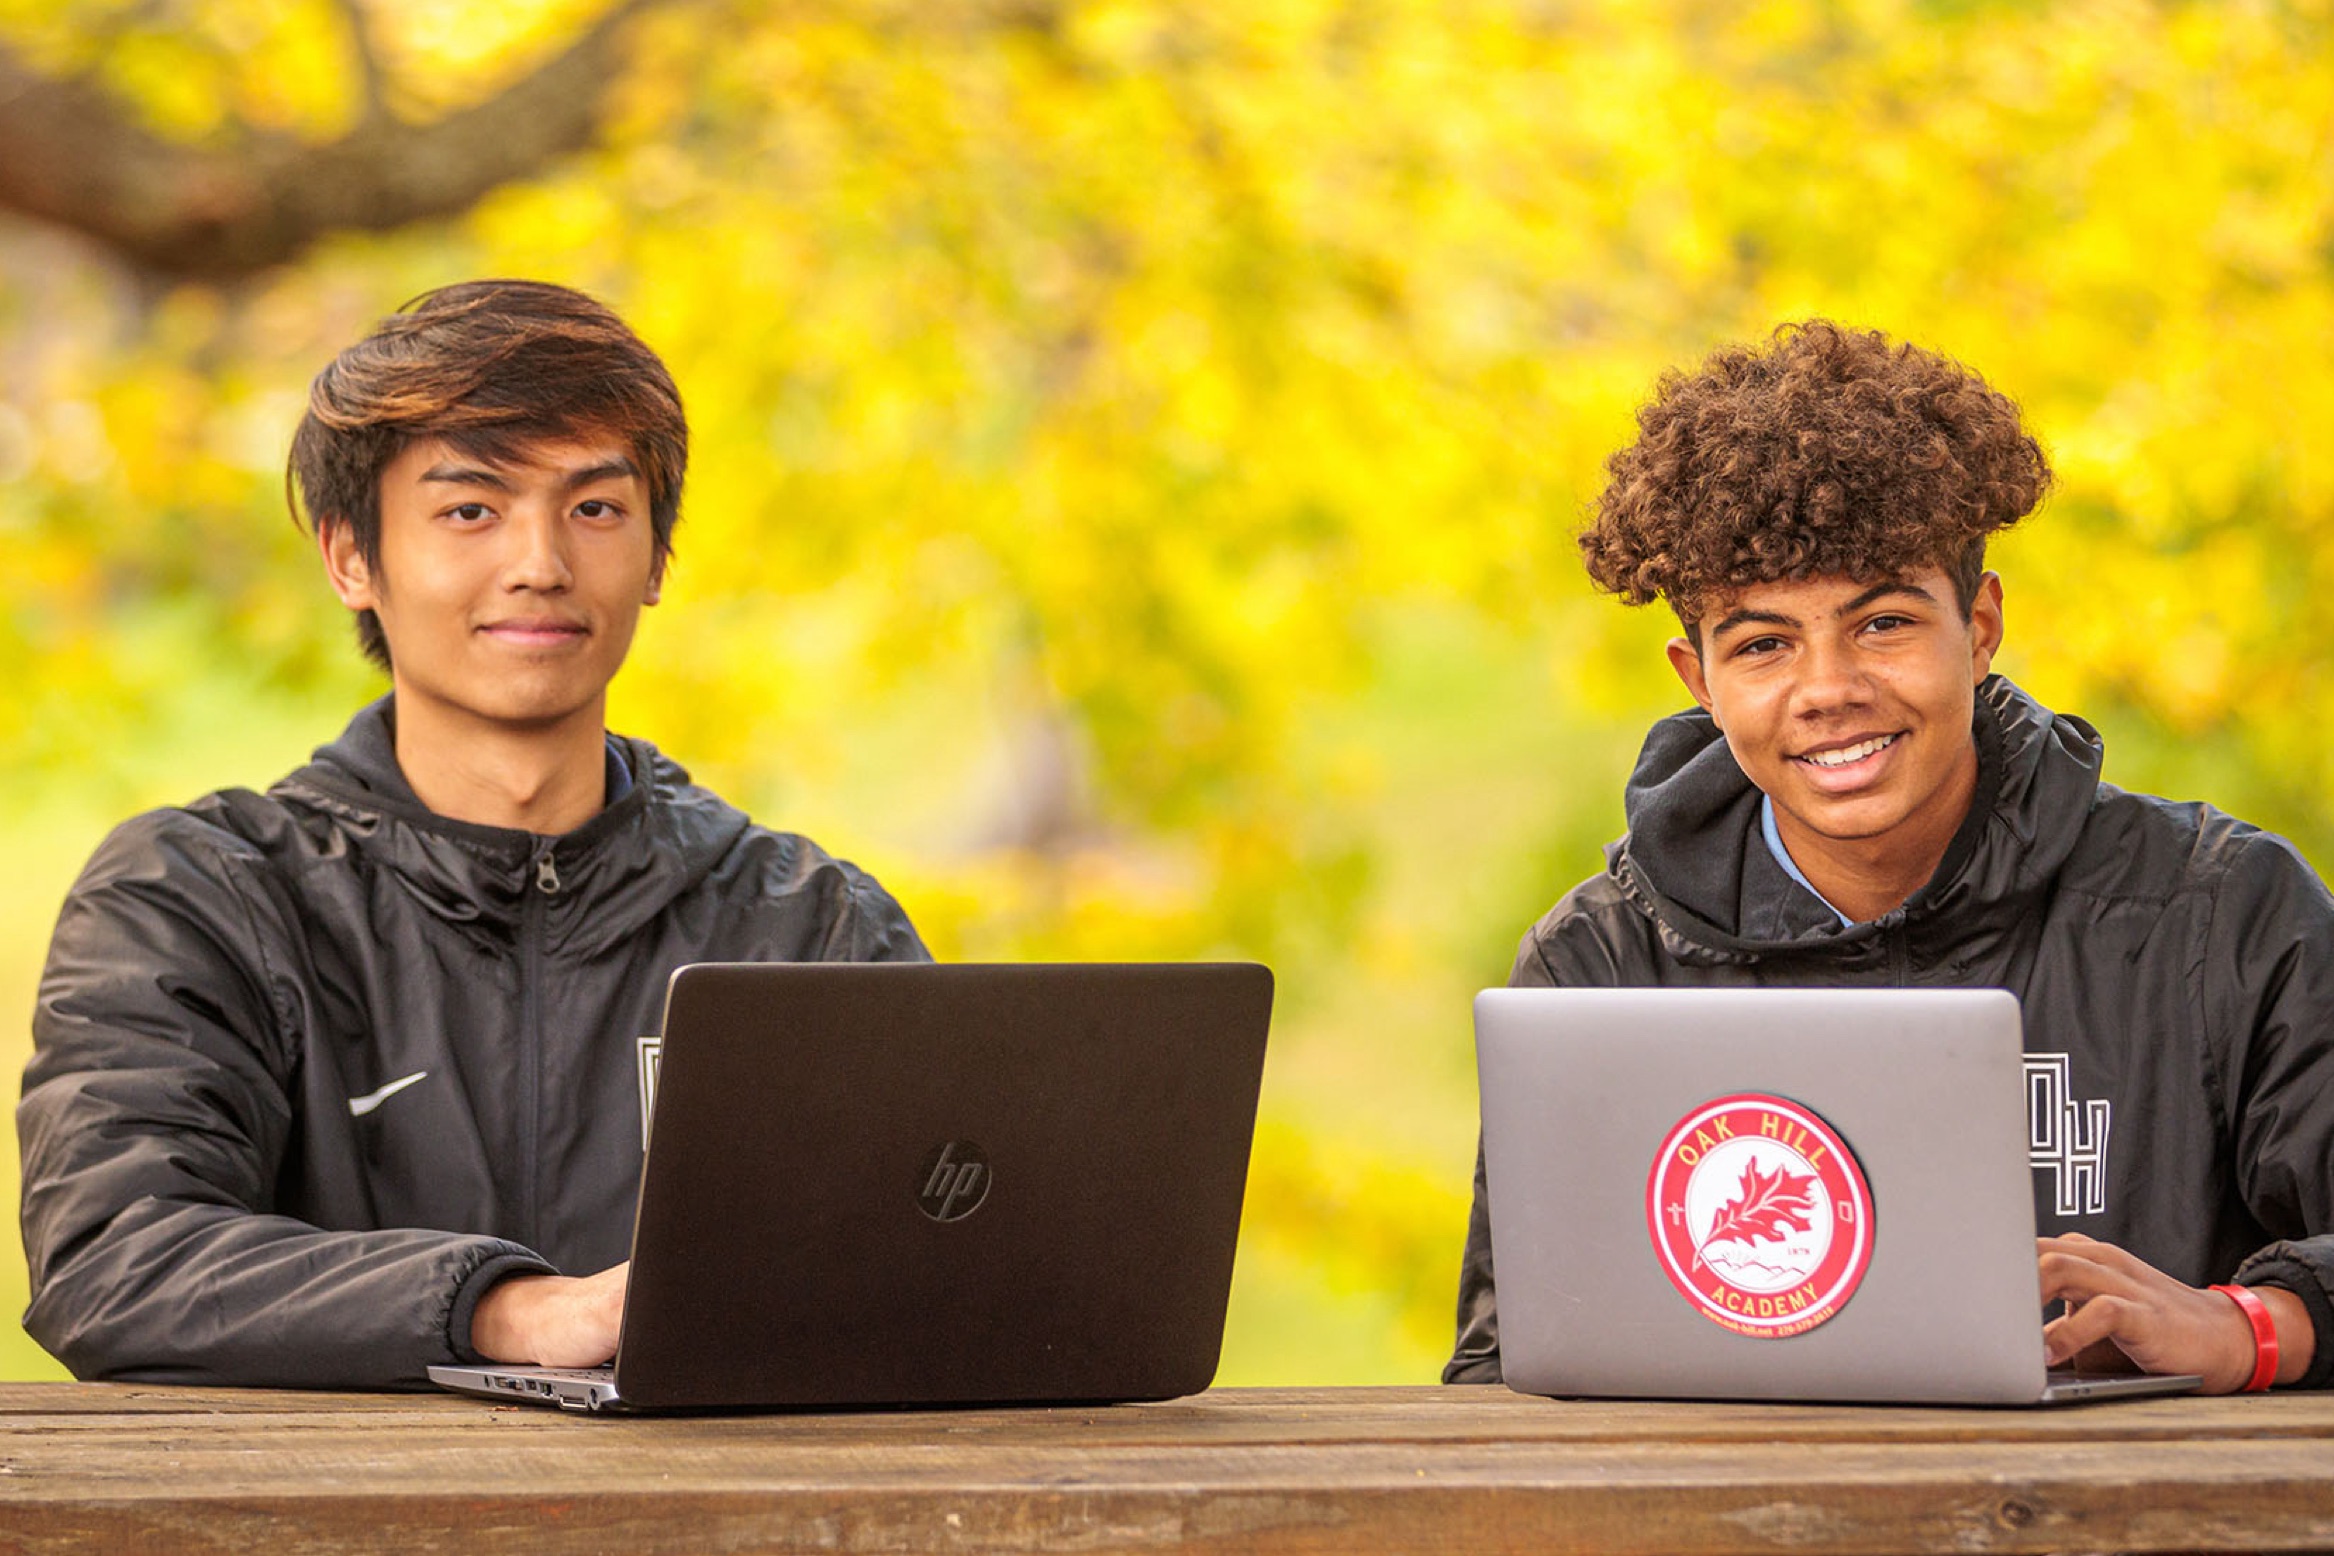 students with laptops outdoors